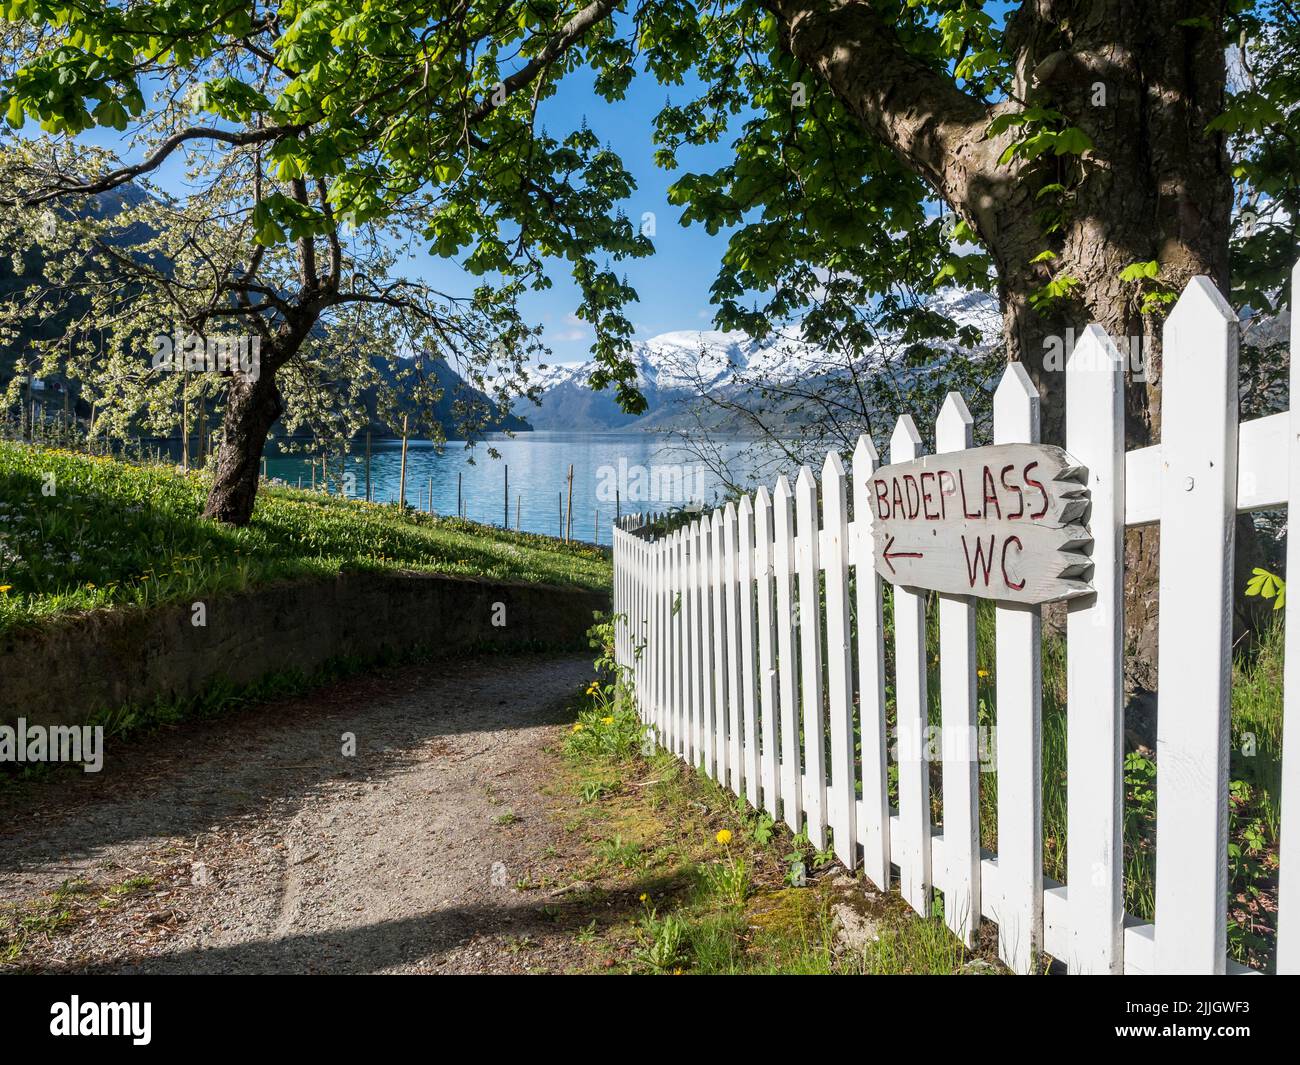 Signpost to a bathing place at the fjord,Sörfjord, branch of the Hardangerfjord, gras and trees, white fence, Ullensvang, Norway Stock Photo